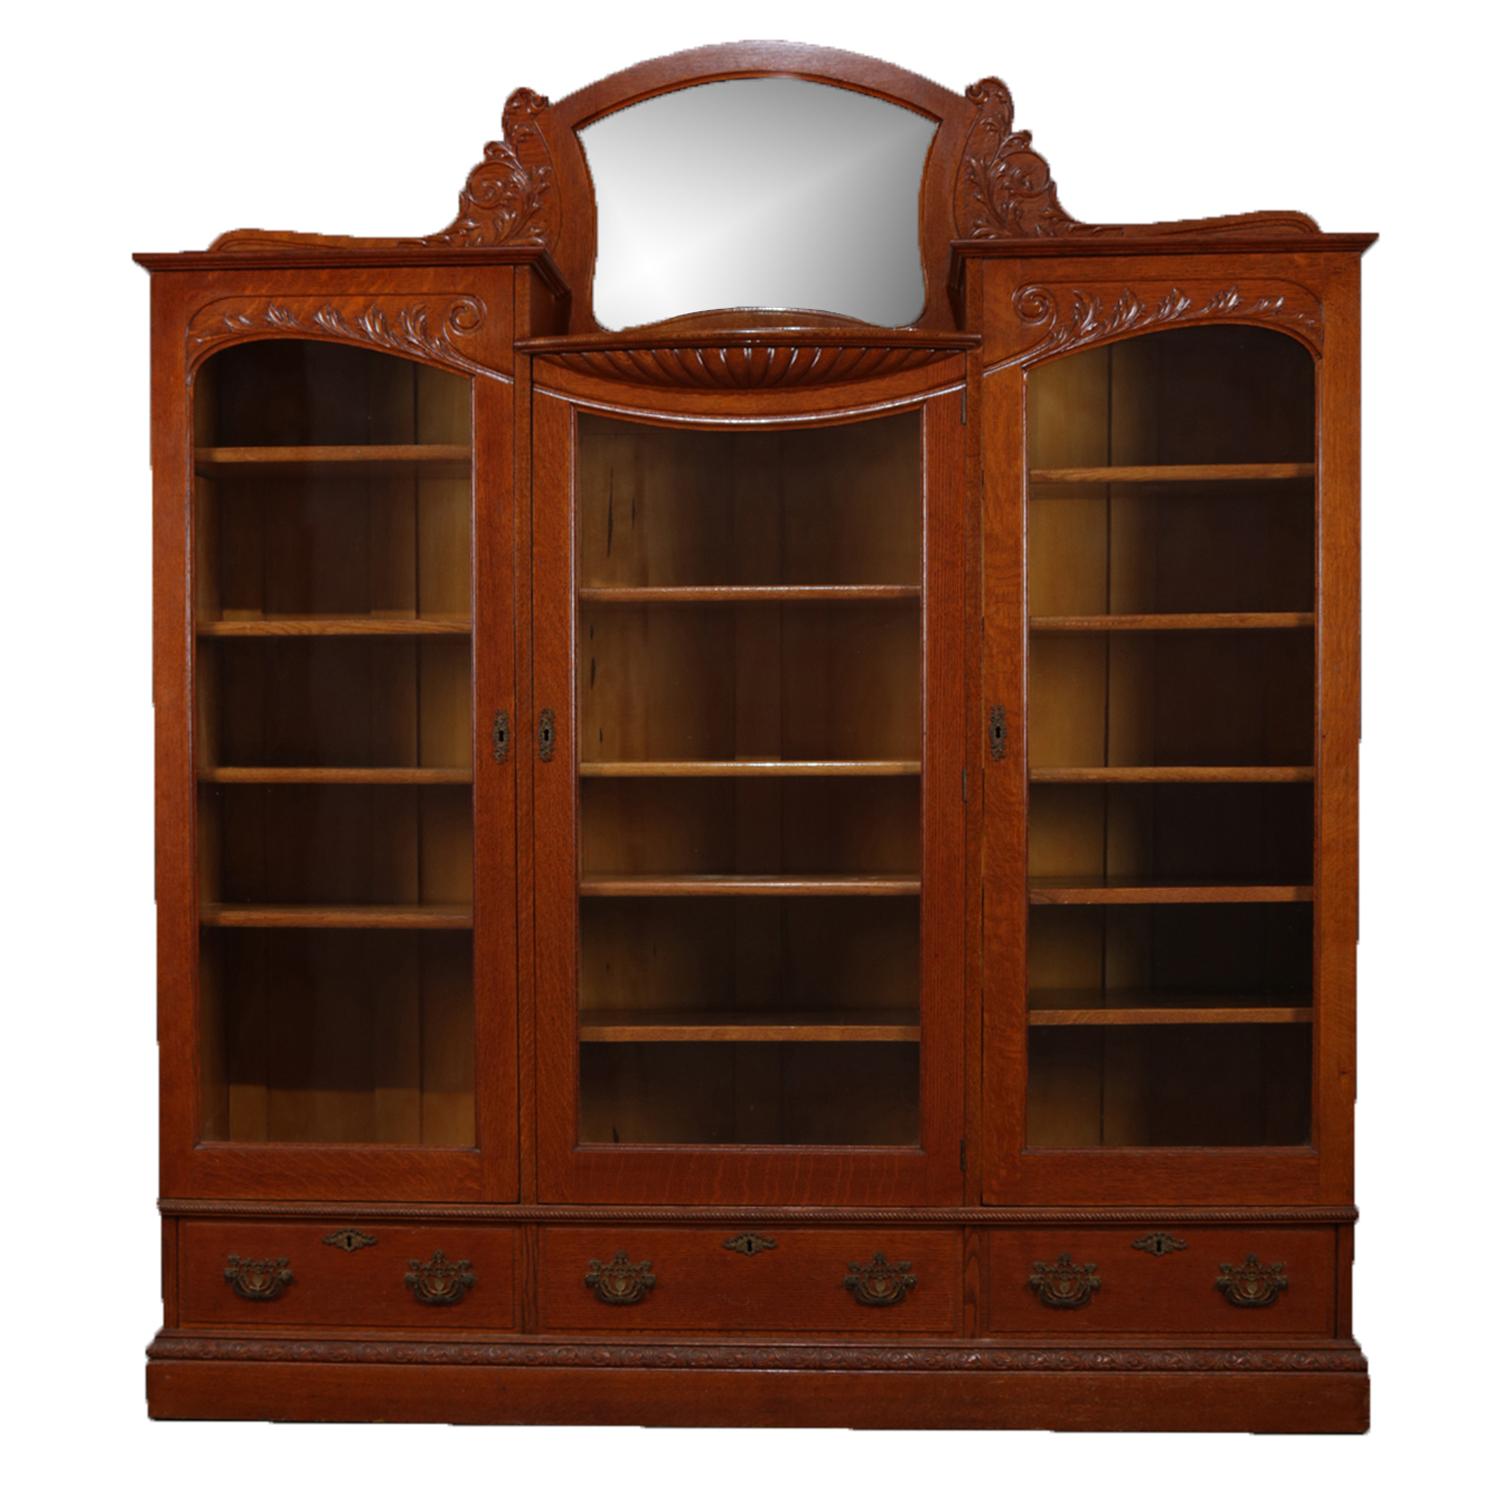 Antique Horner school bookcase features crest with central mirror and flanking carved foliate frame above three locking glass door bookcase with key and adjustable shelving and three lower locking drawers, circa 1900.

Measures: 73